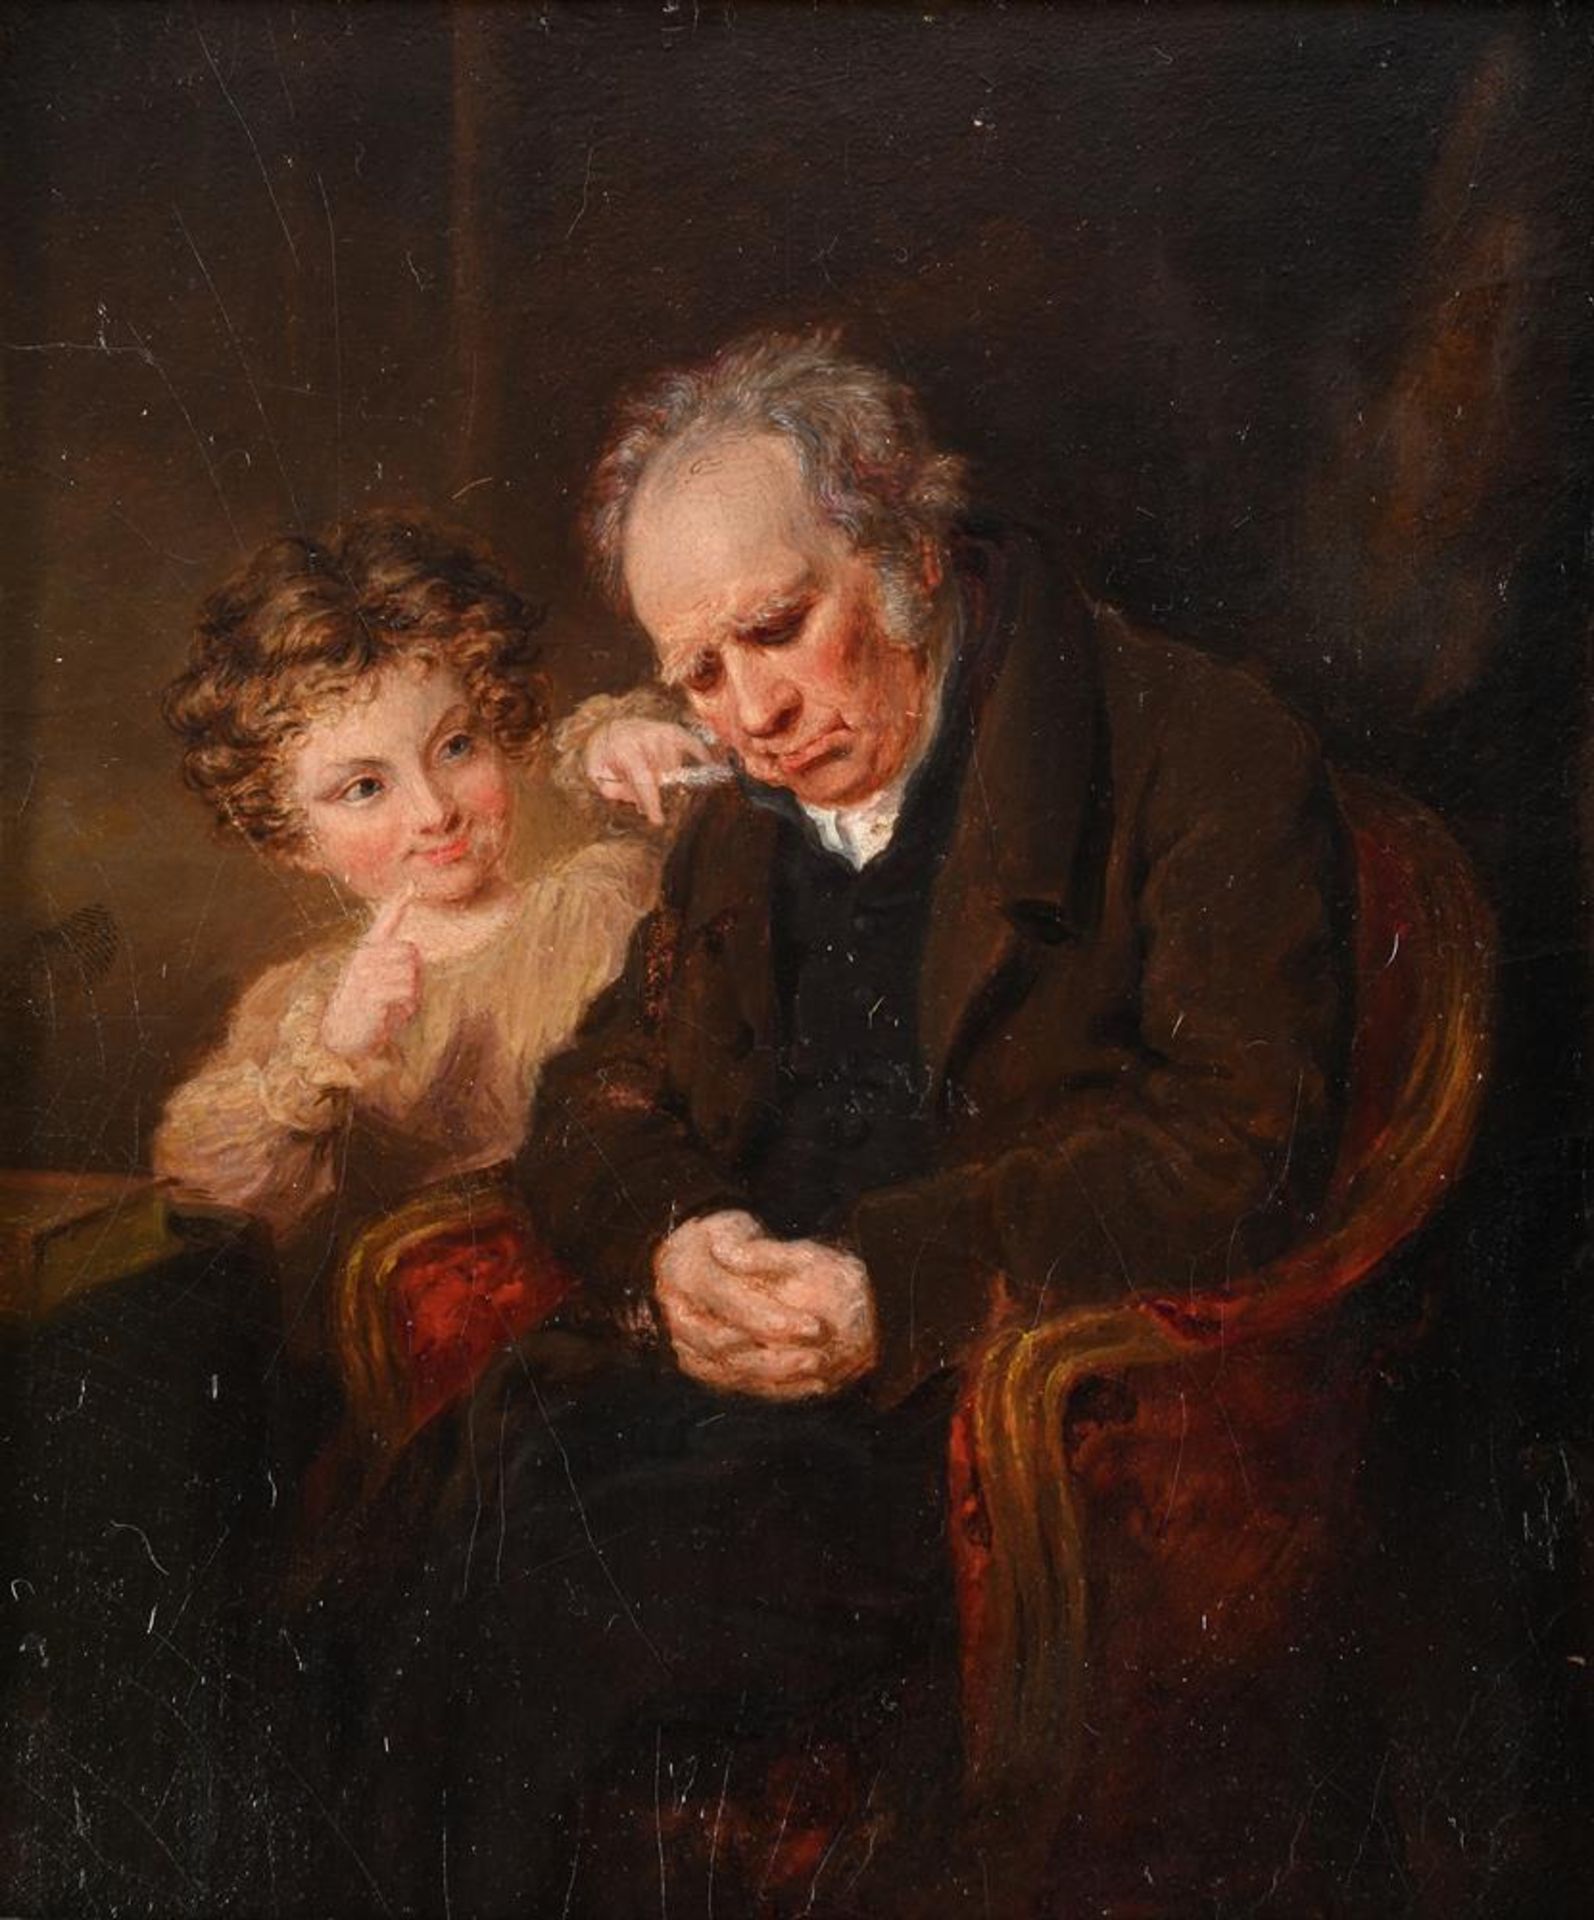 ENGLISH SCHOOL (19TH CENTURY), A CHILD TICKLING A SLEEPING MAN WITH A FEATHER